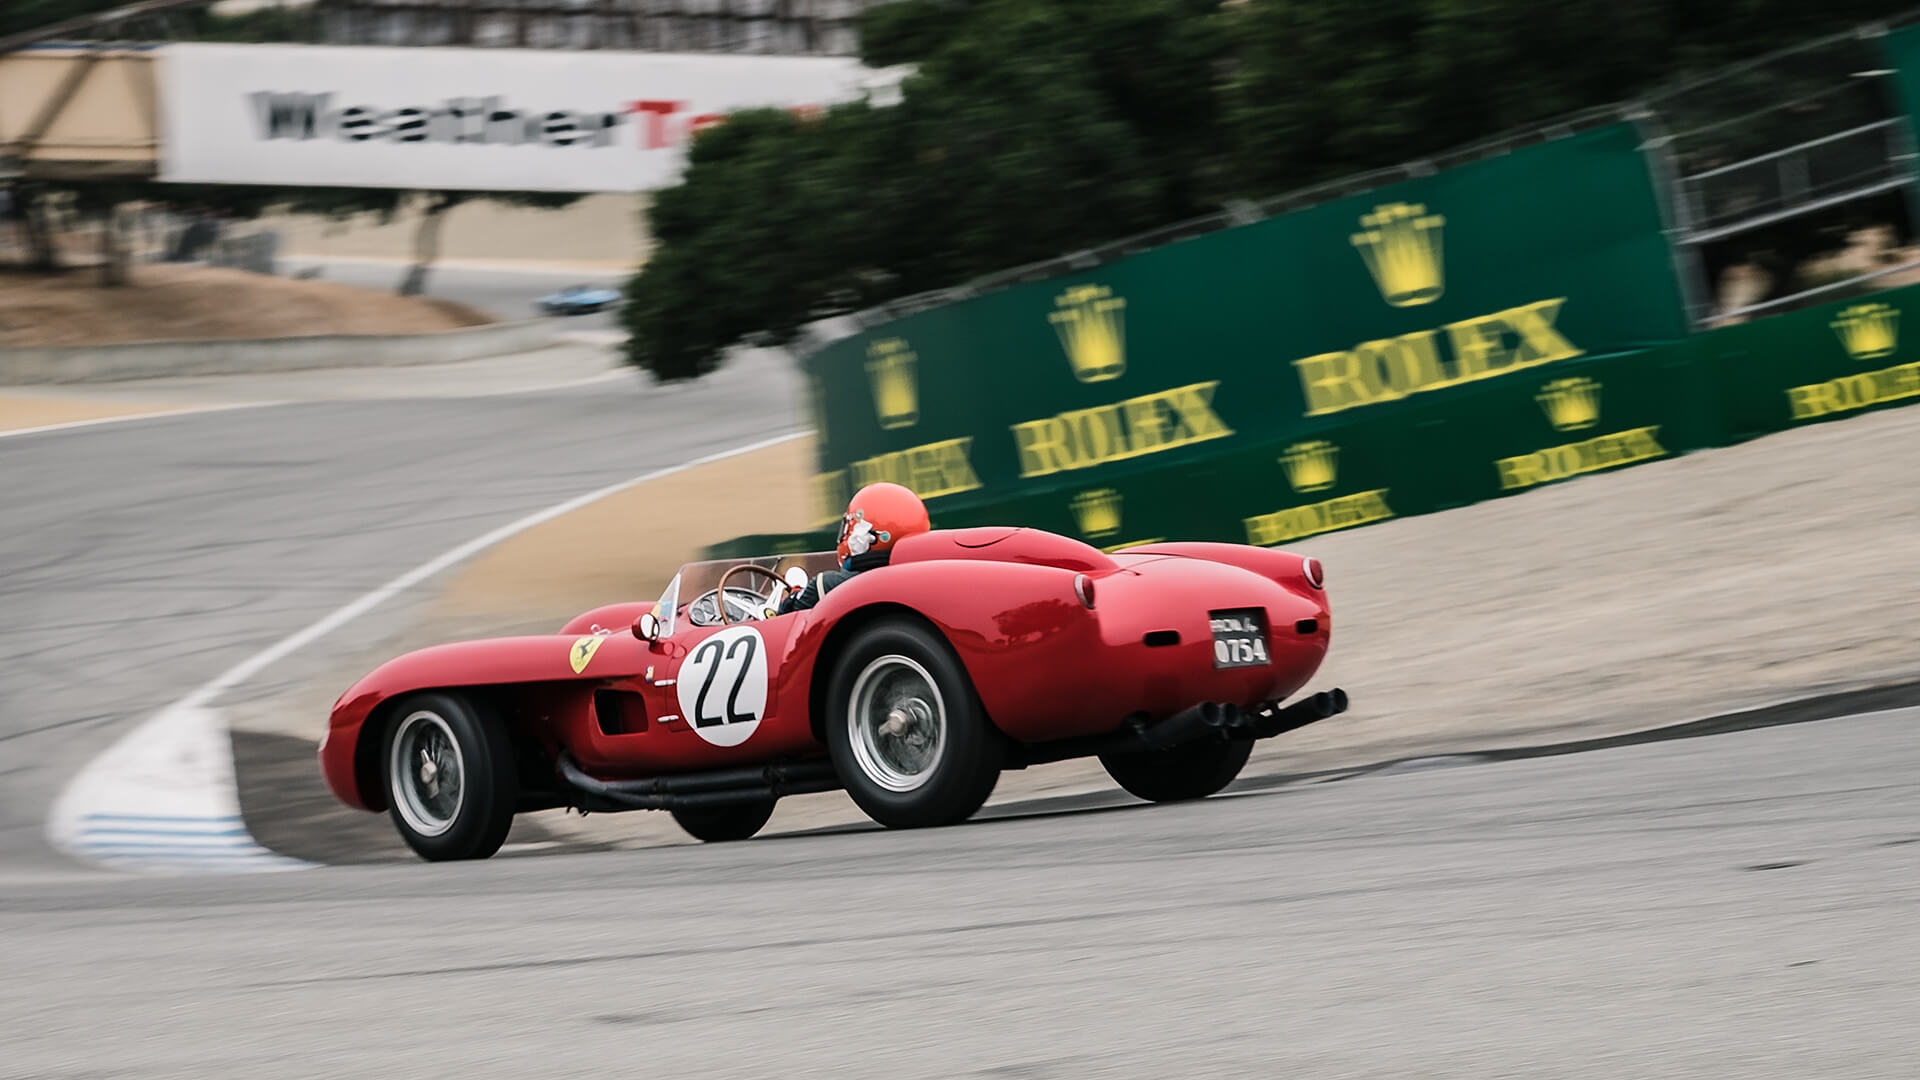 Rolex Monterey Motorsports Reunion: A day at the races